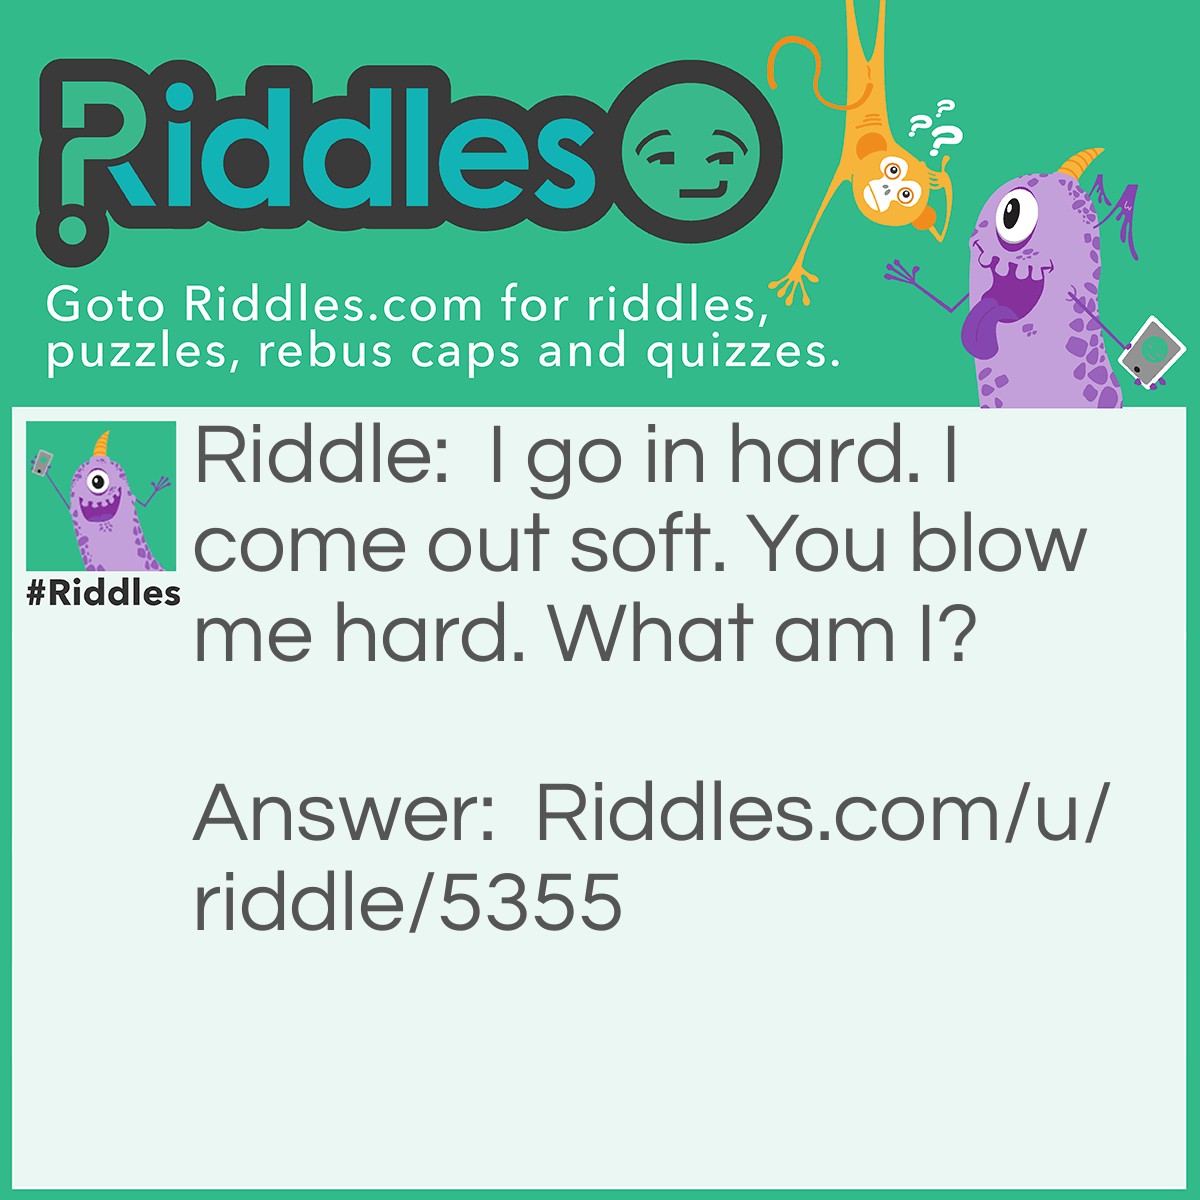 Riddle: I go in hard. I come out soft. You blow me hard. What am I? Answer: Gum.